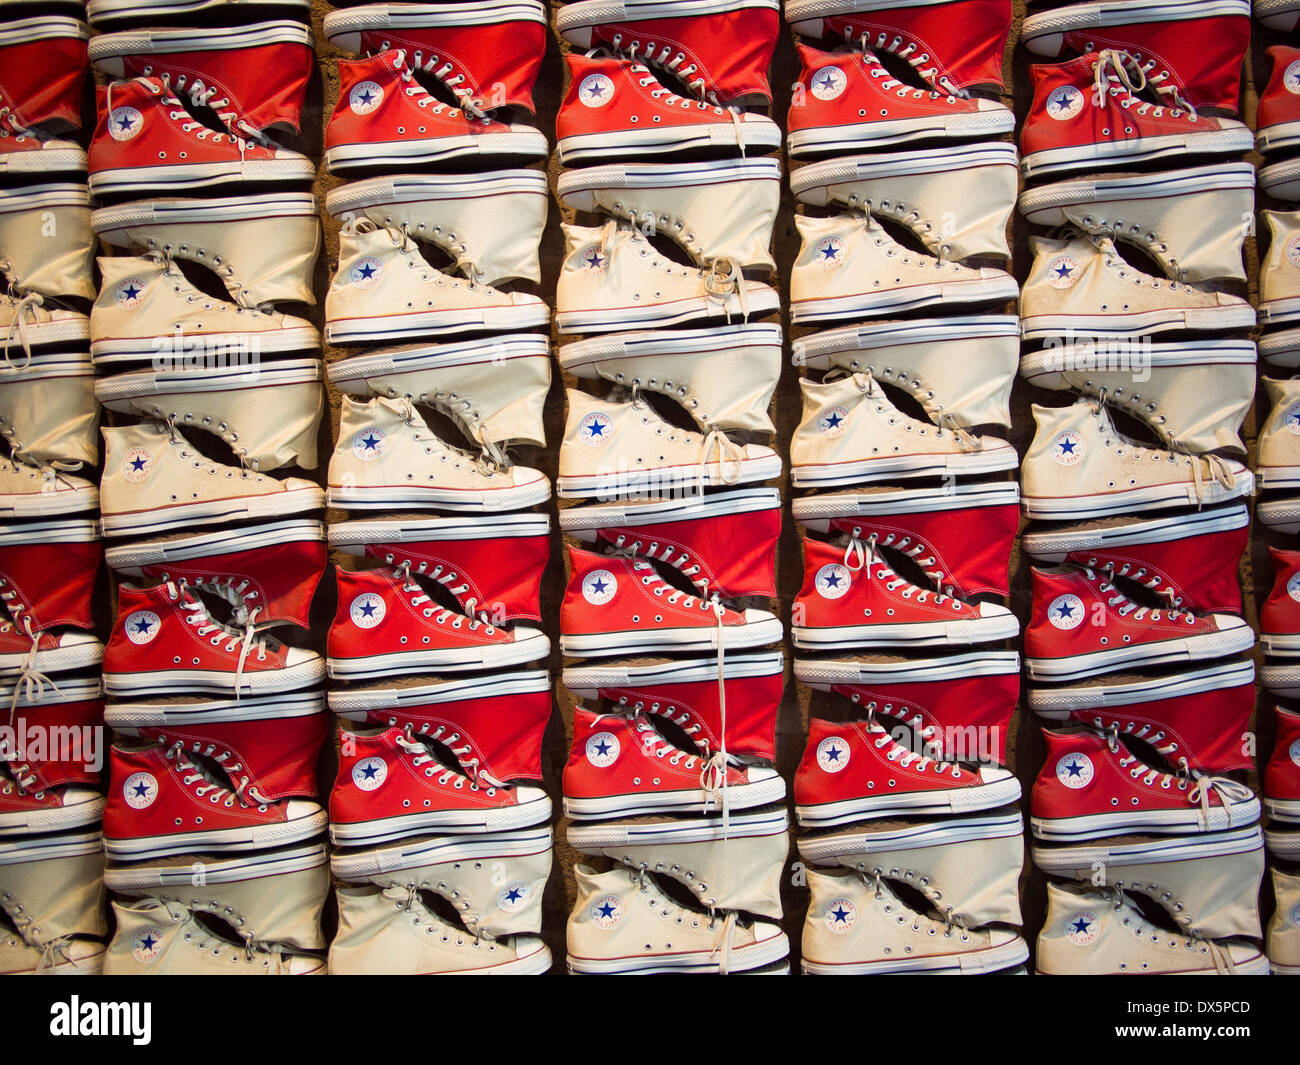 Converse All Star, New York Banque D'Images